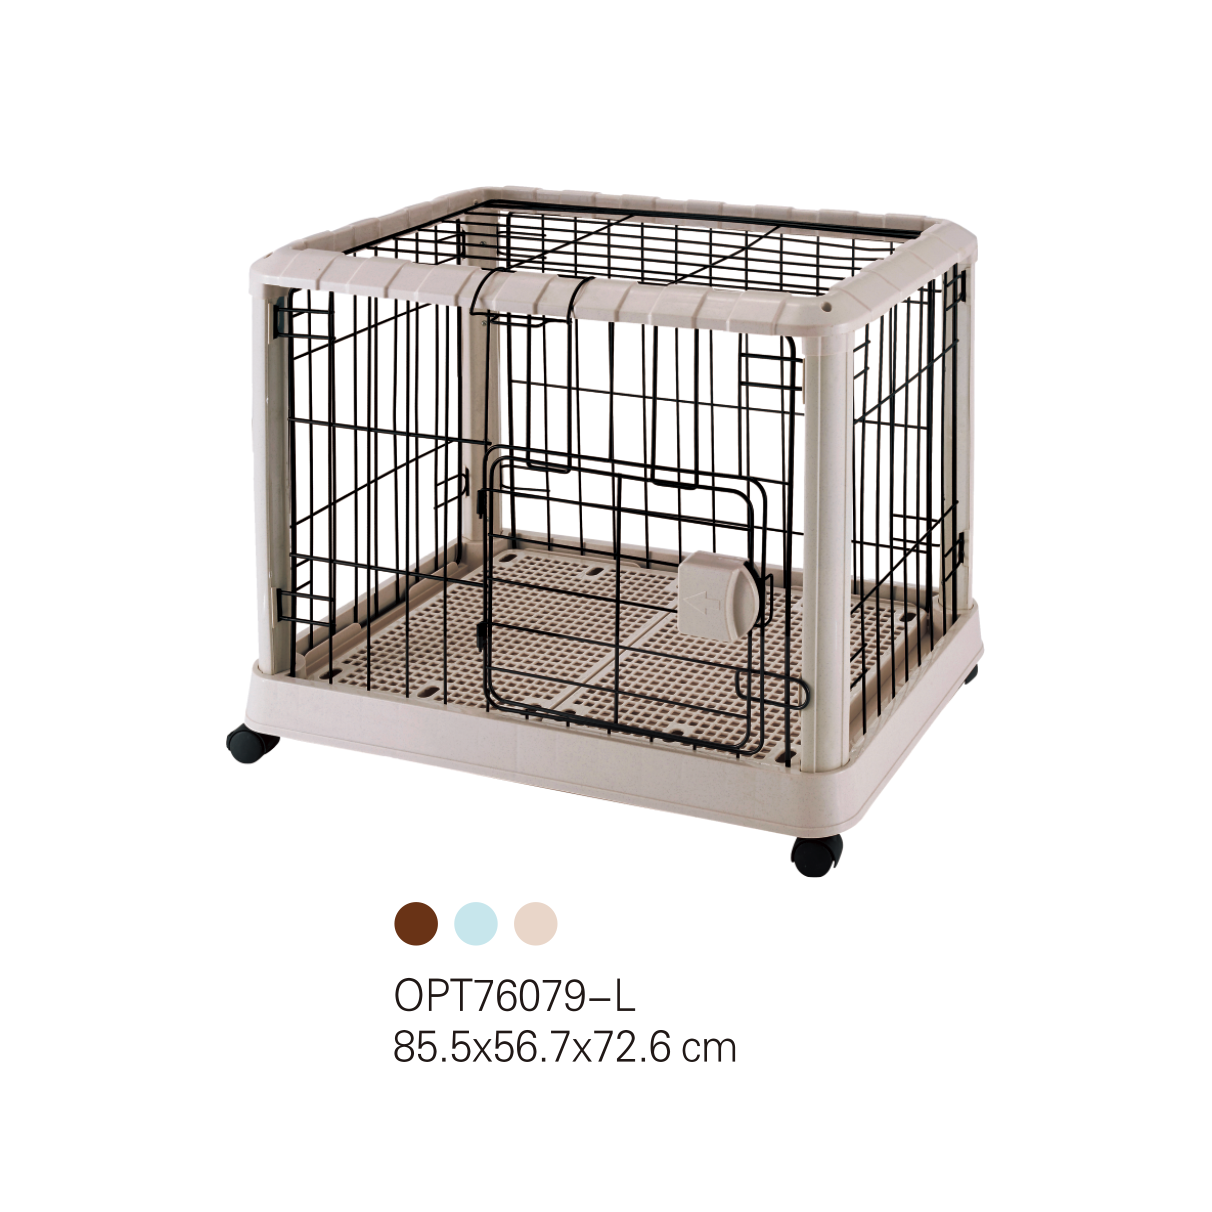 OPT76079 Pet cage